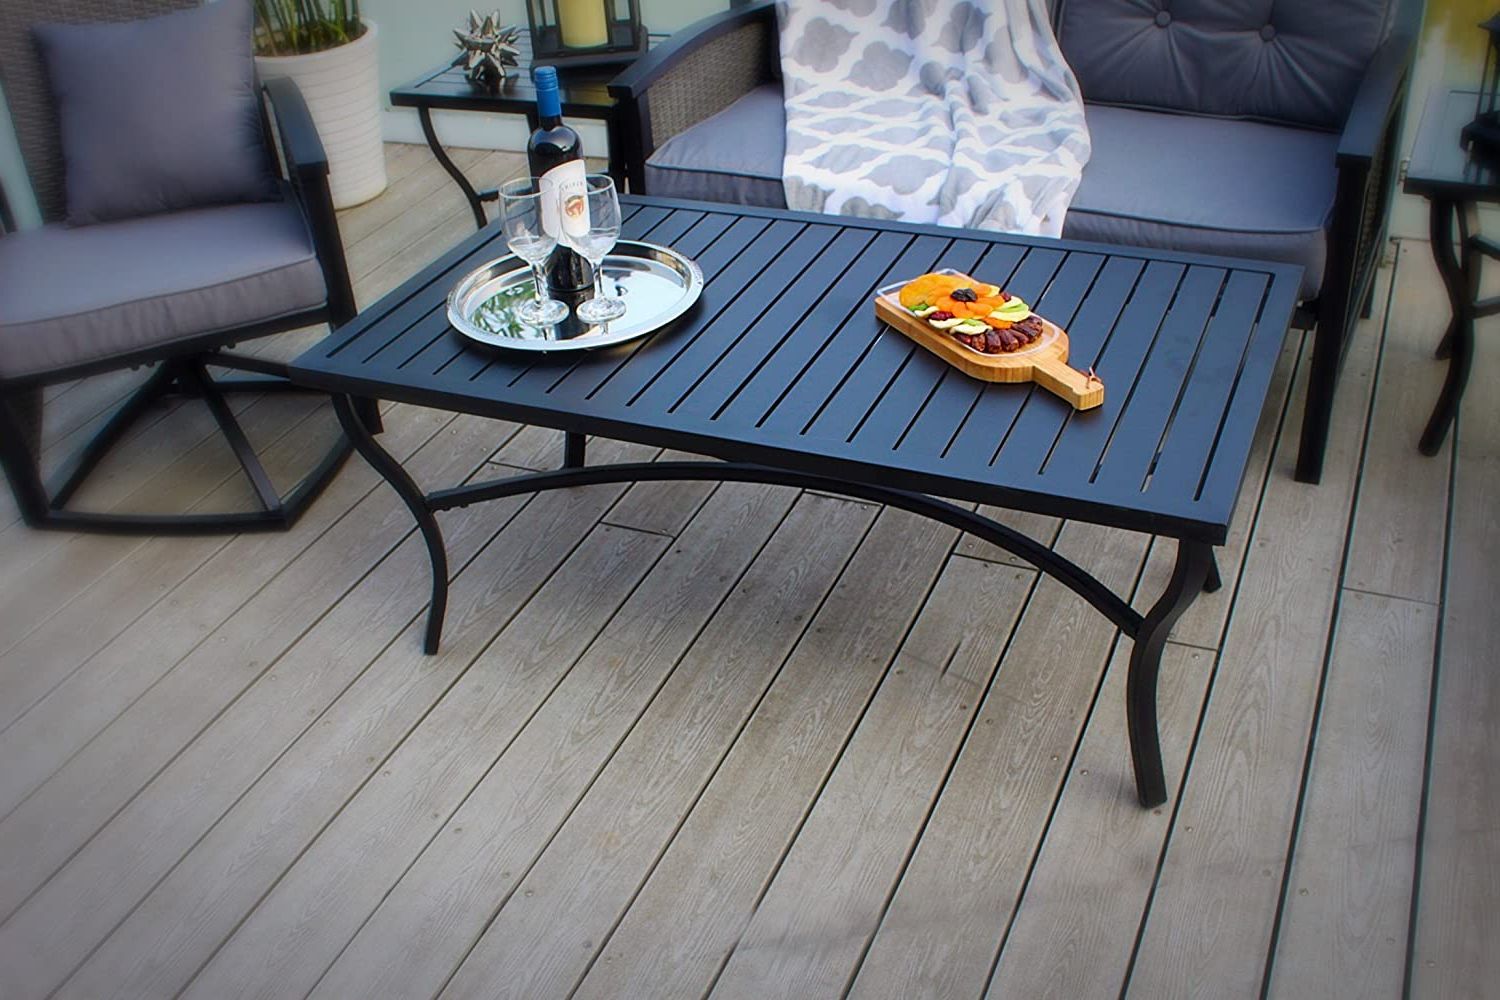 The 8 Best Outdoor Coffee Tables Of 2020 For Your Porch Or Patio | Spy In Outdoor Half Round Coffee Tables (View 10 of 20)